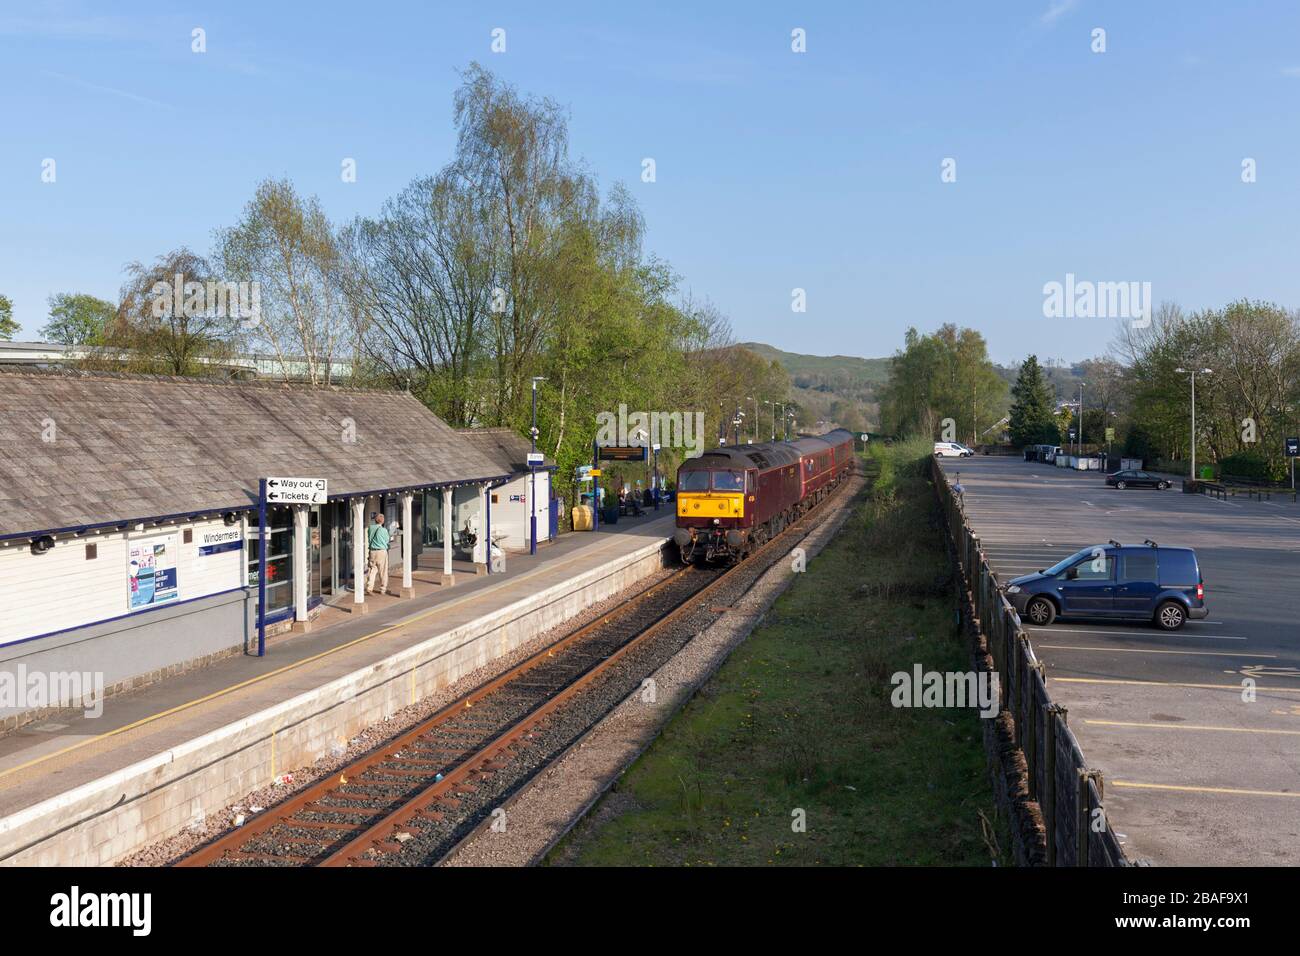 West Coast railway class 47 locomotive 47826 at Windermere railway station when WCRC wee operating the Windermere line shuttle Stock Photo